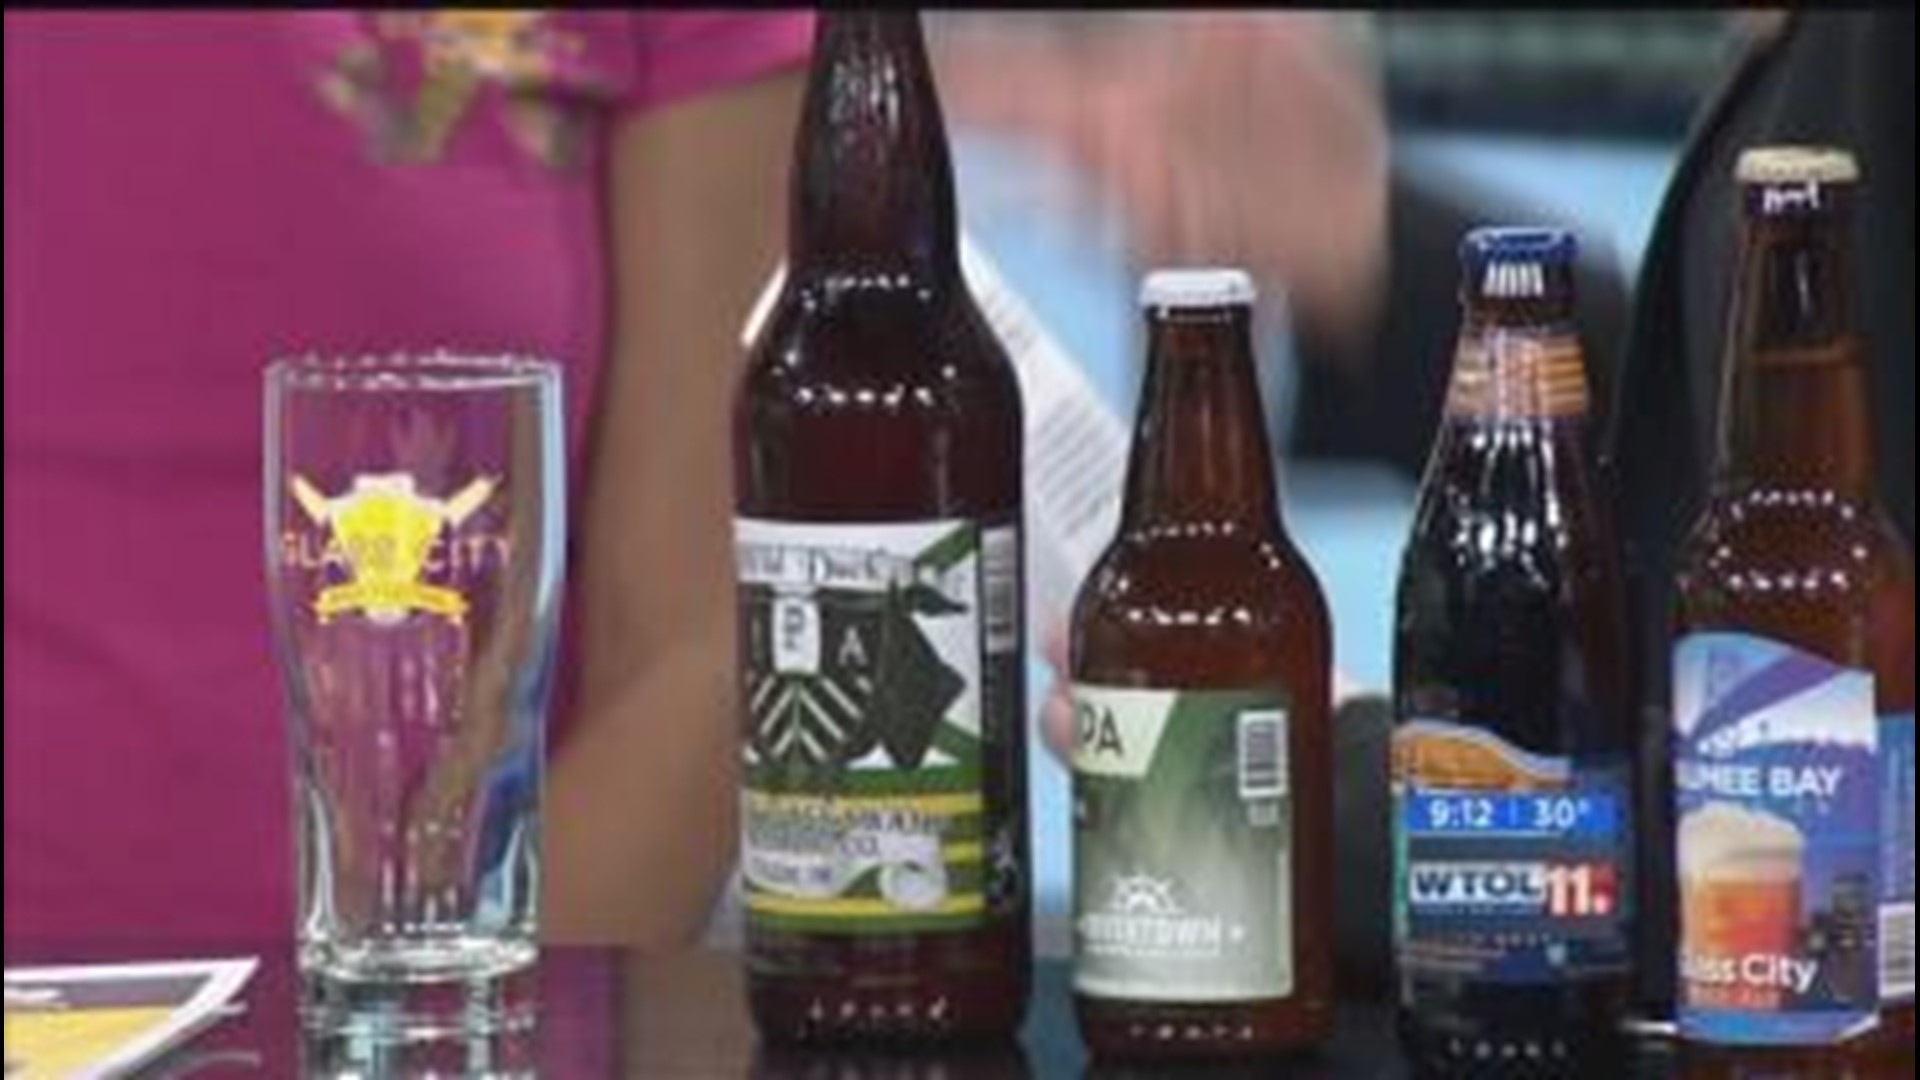 You're invited to the 11th annual Glass City Beer Festival